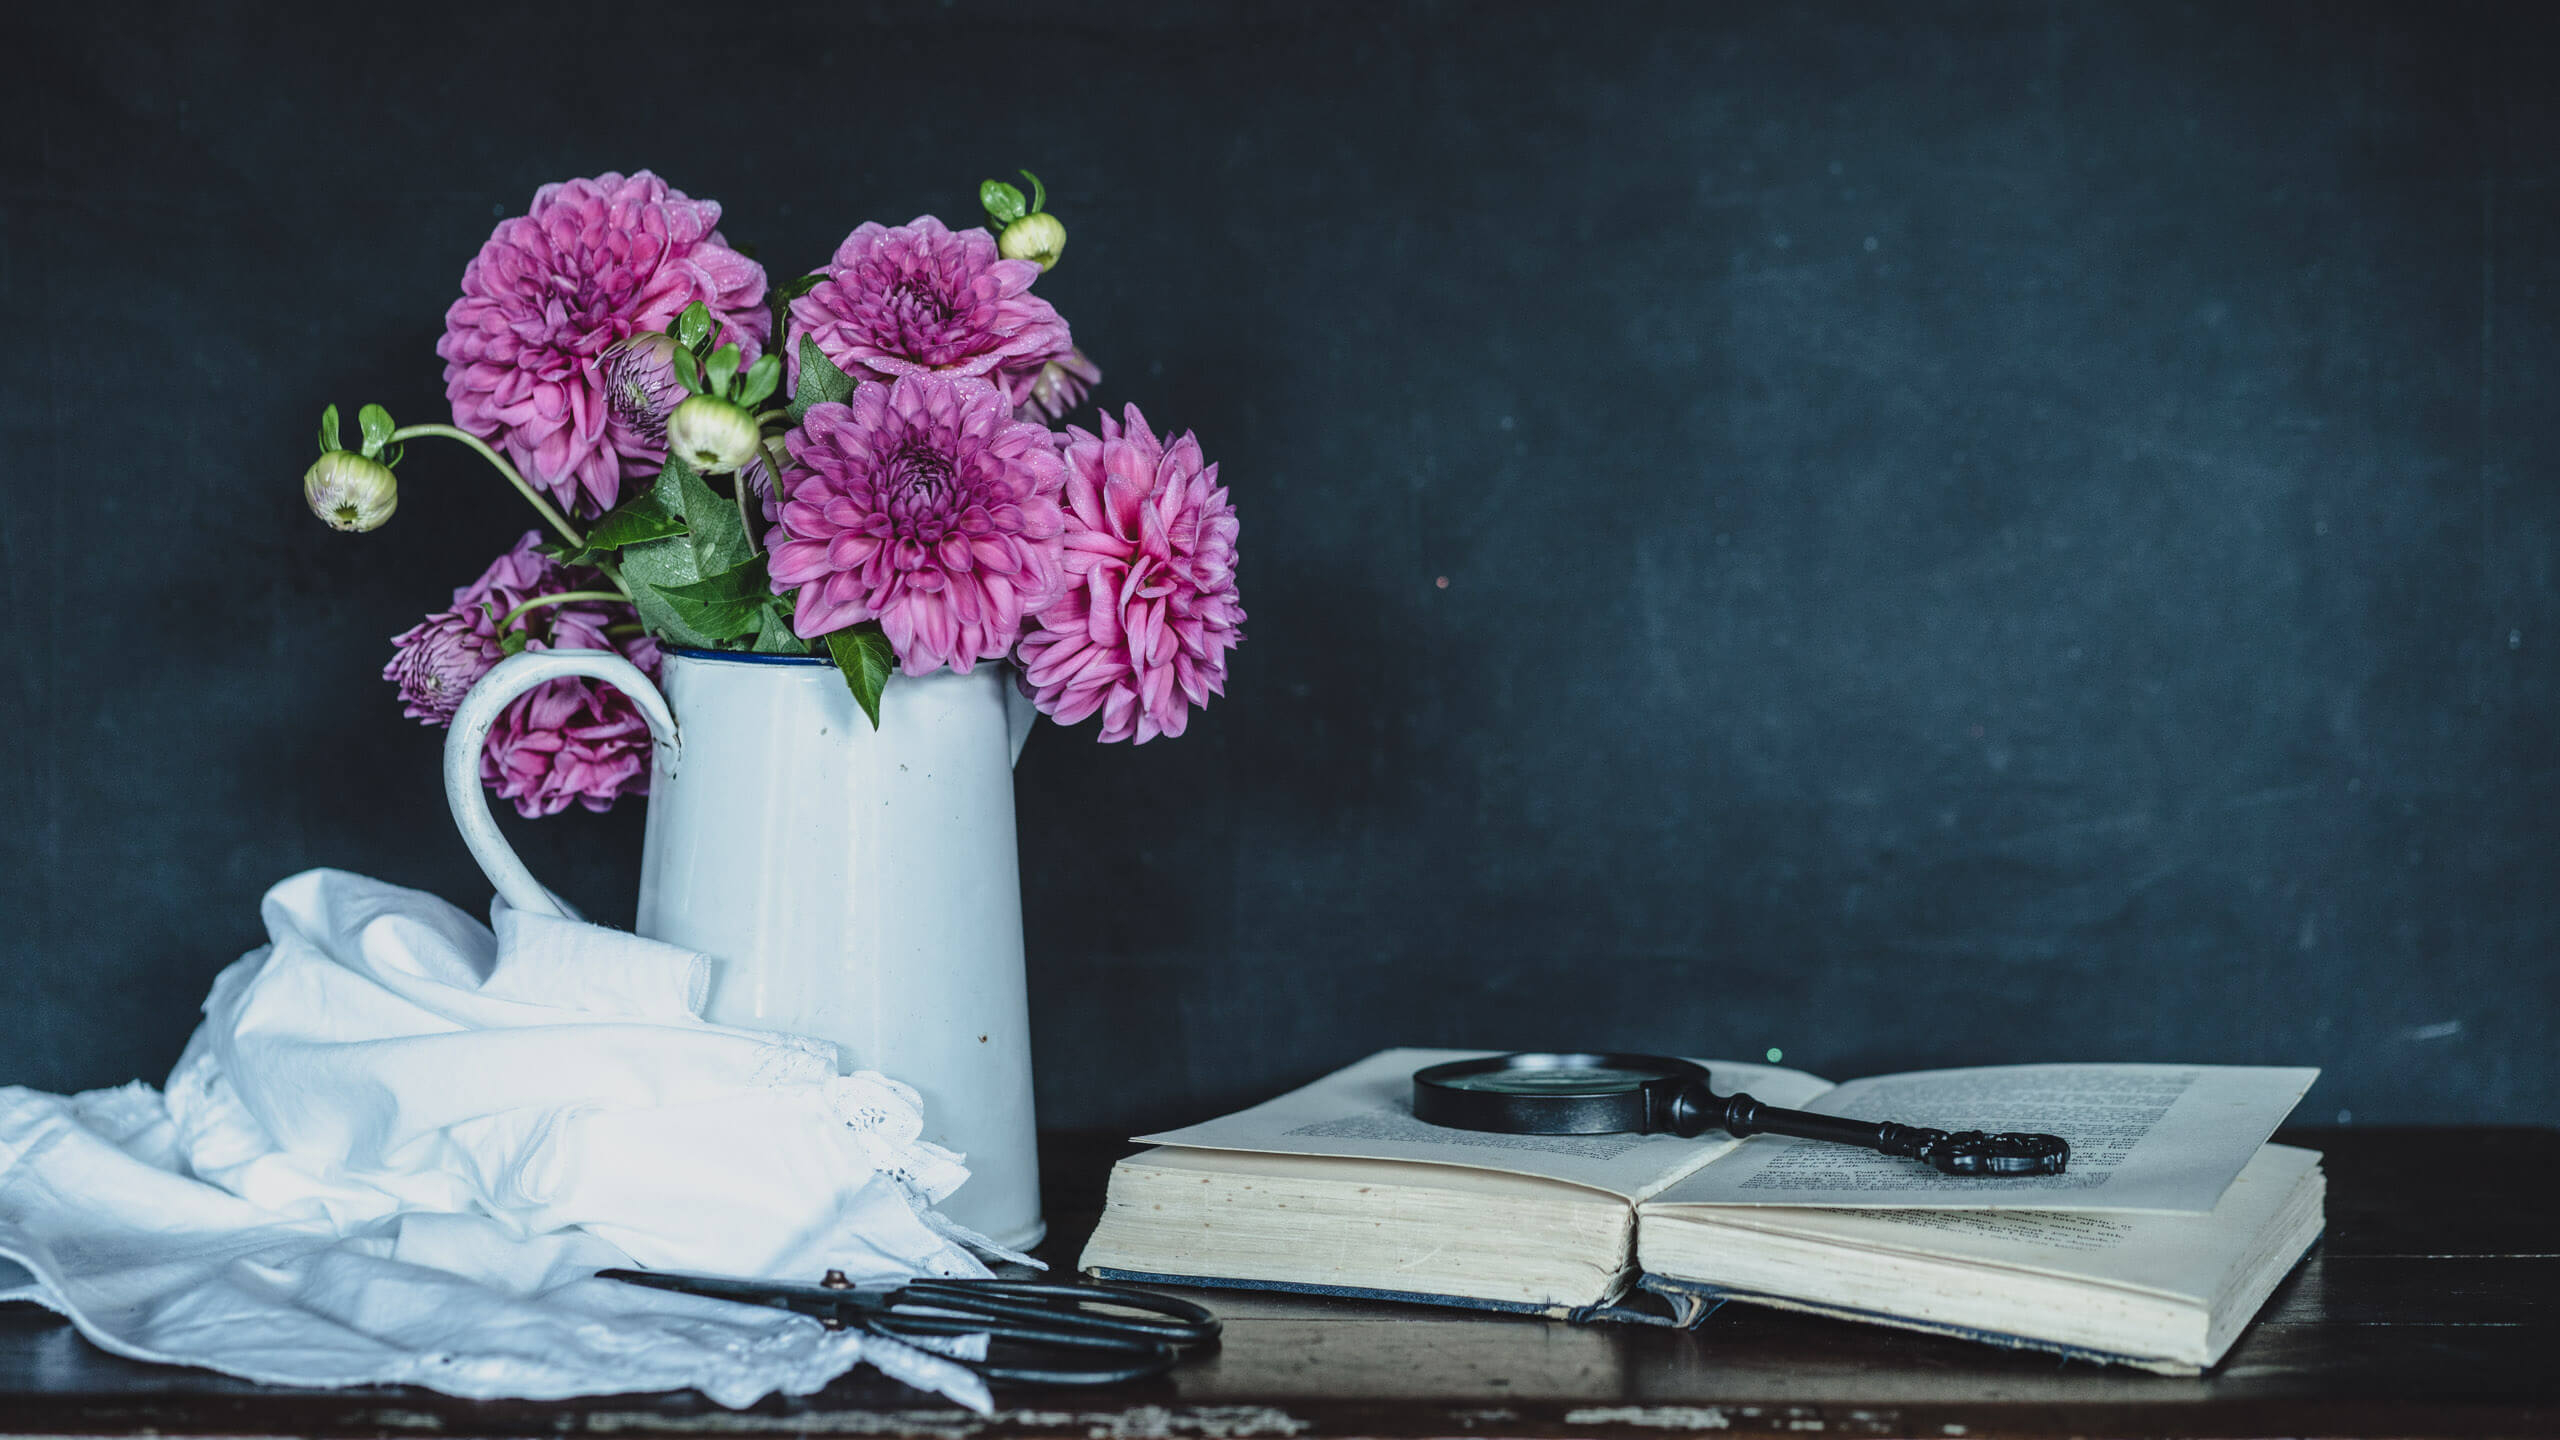 2560x1440 Where to place books in still life photography Photofocus